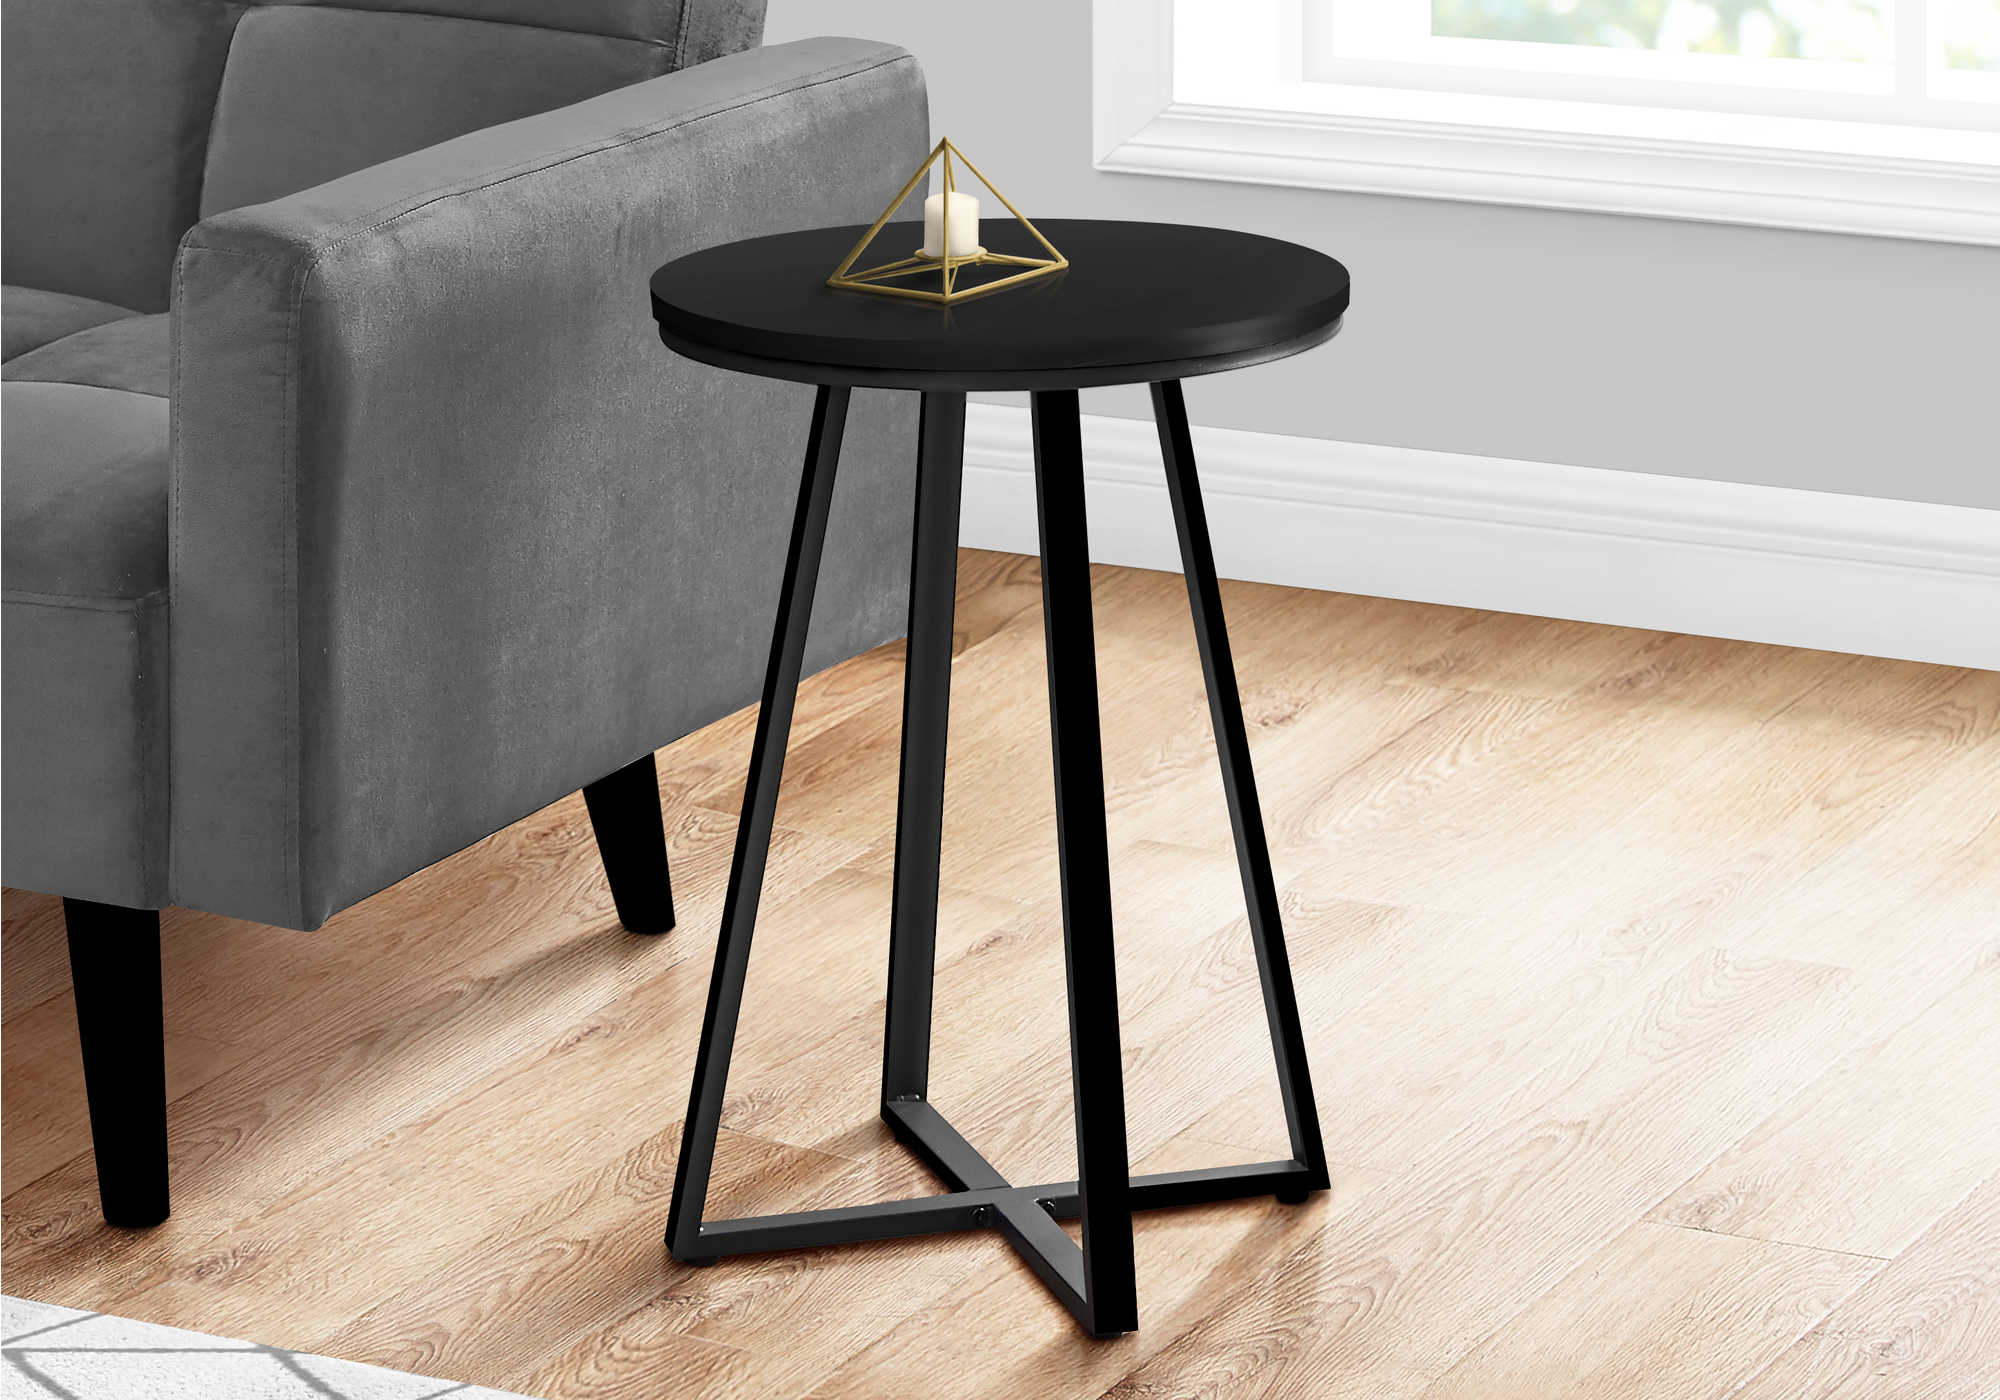 I 2175 - ACCENT TABLE - 22"H / BLACK / BLACK METAL BY MONARCH SPECIALTIES INC